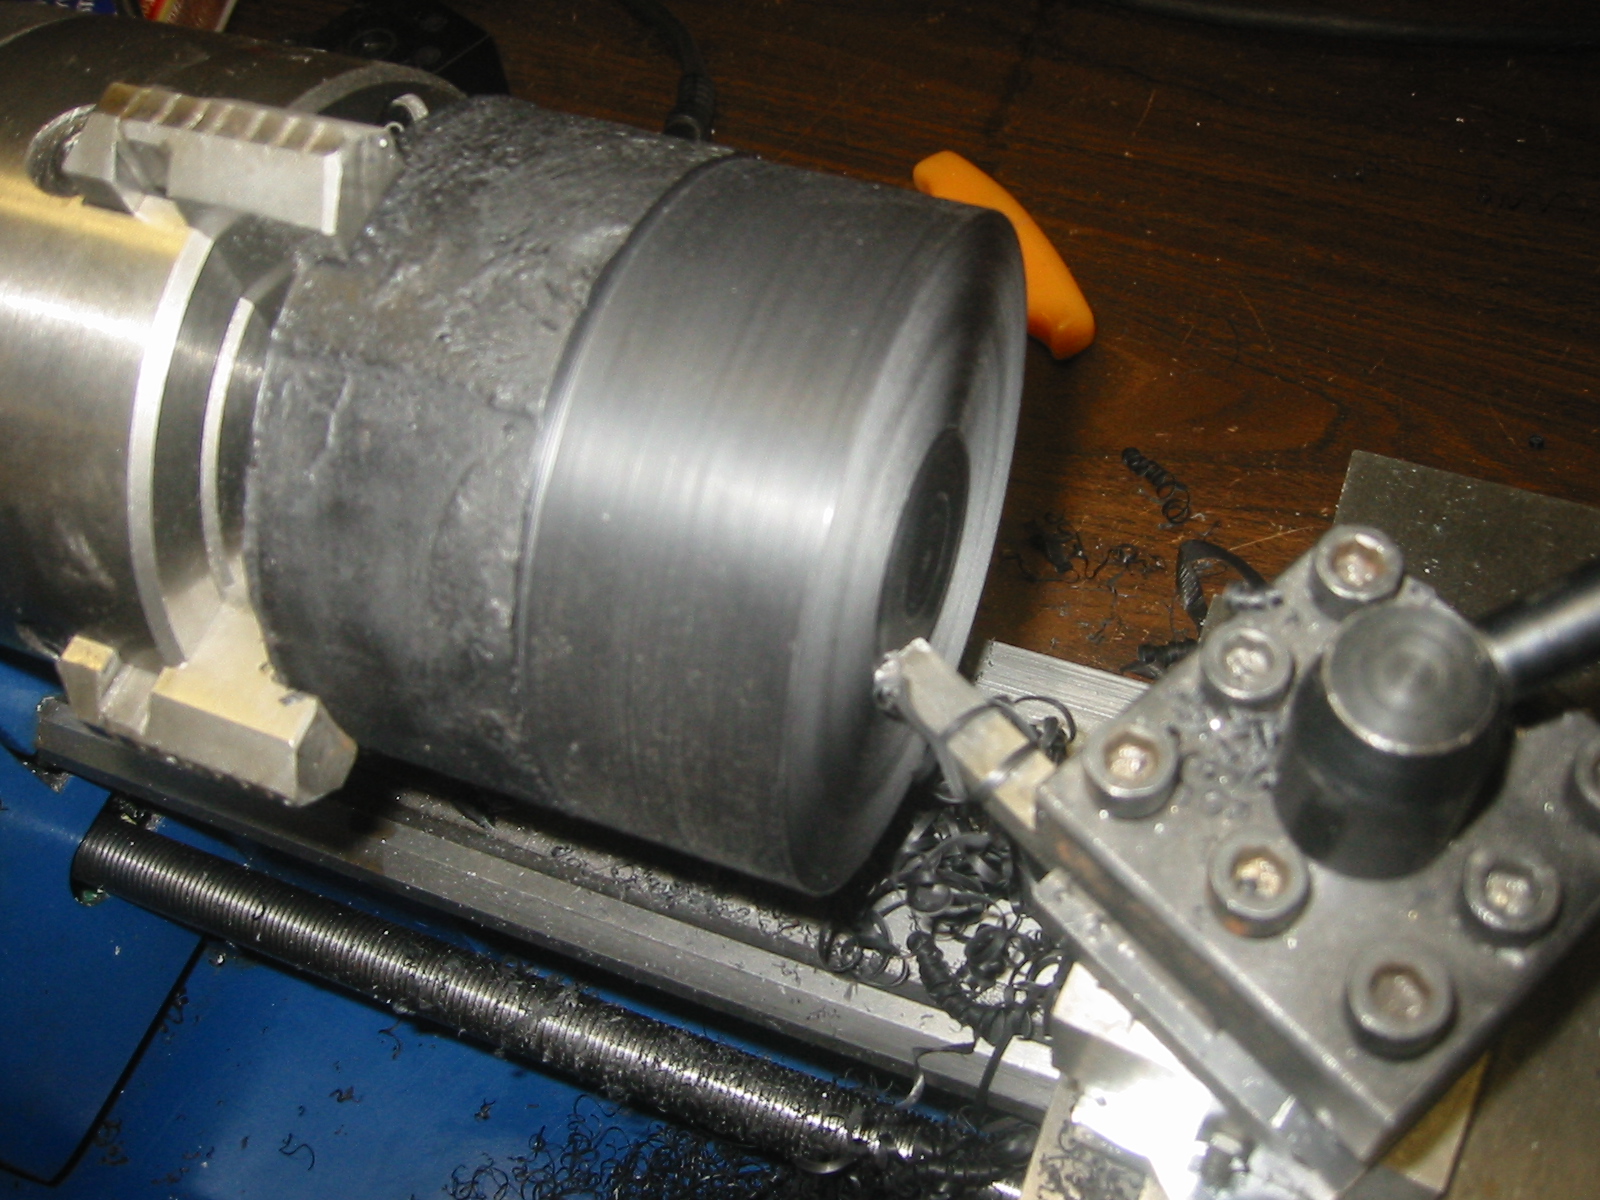 (5) Machineable wax in the lathe.  